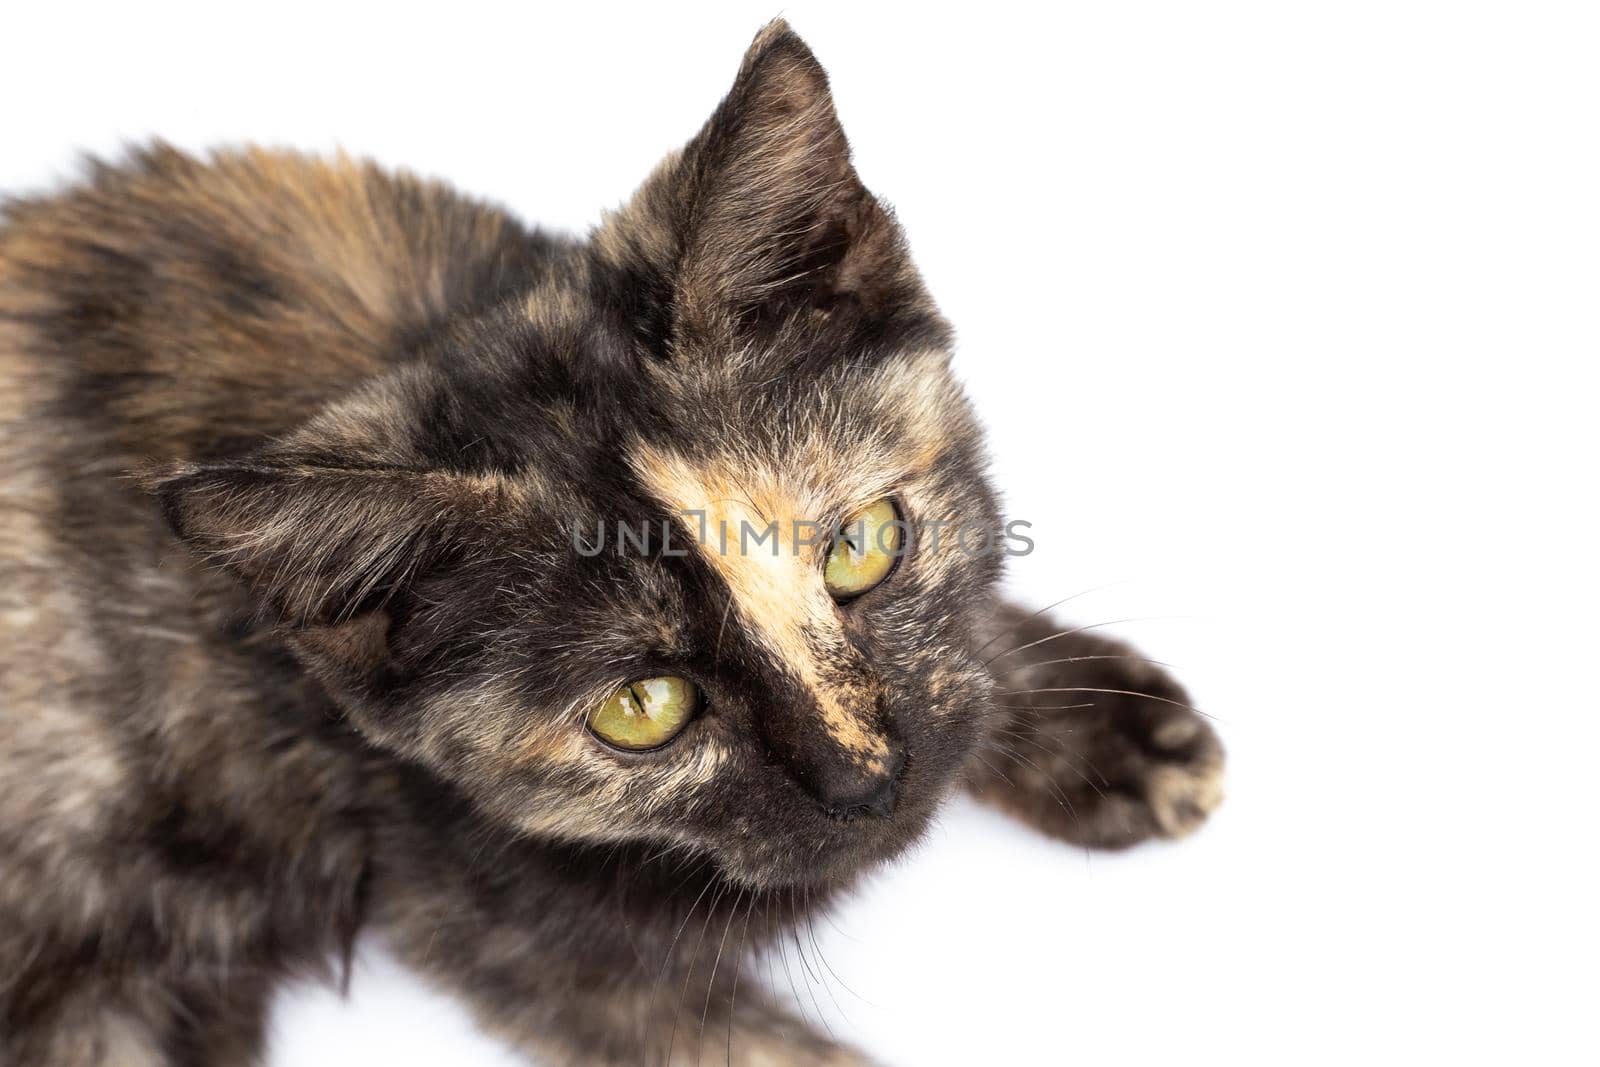 A black motley spotted kitten with a stripe on the nose on a white background looks into the camera.